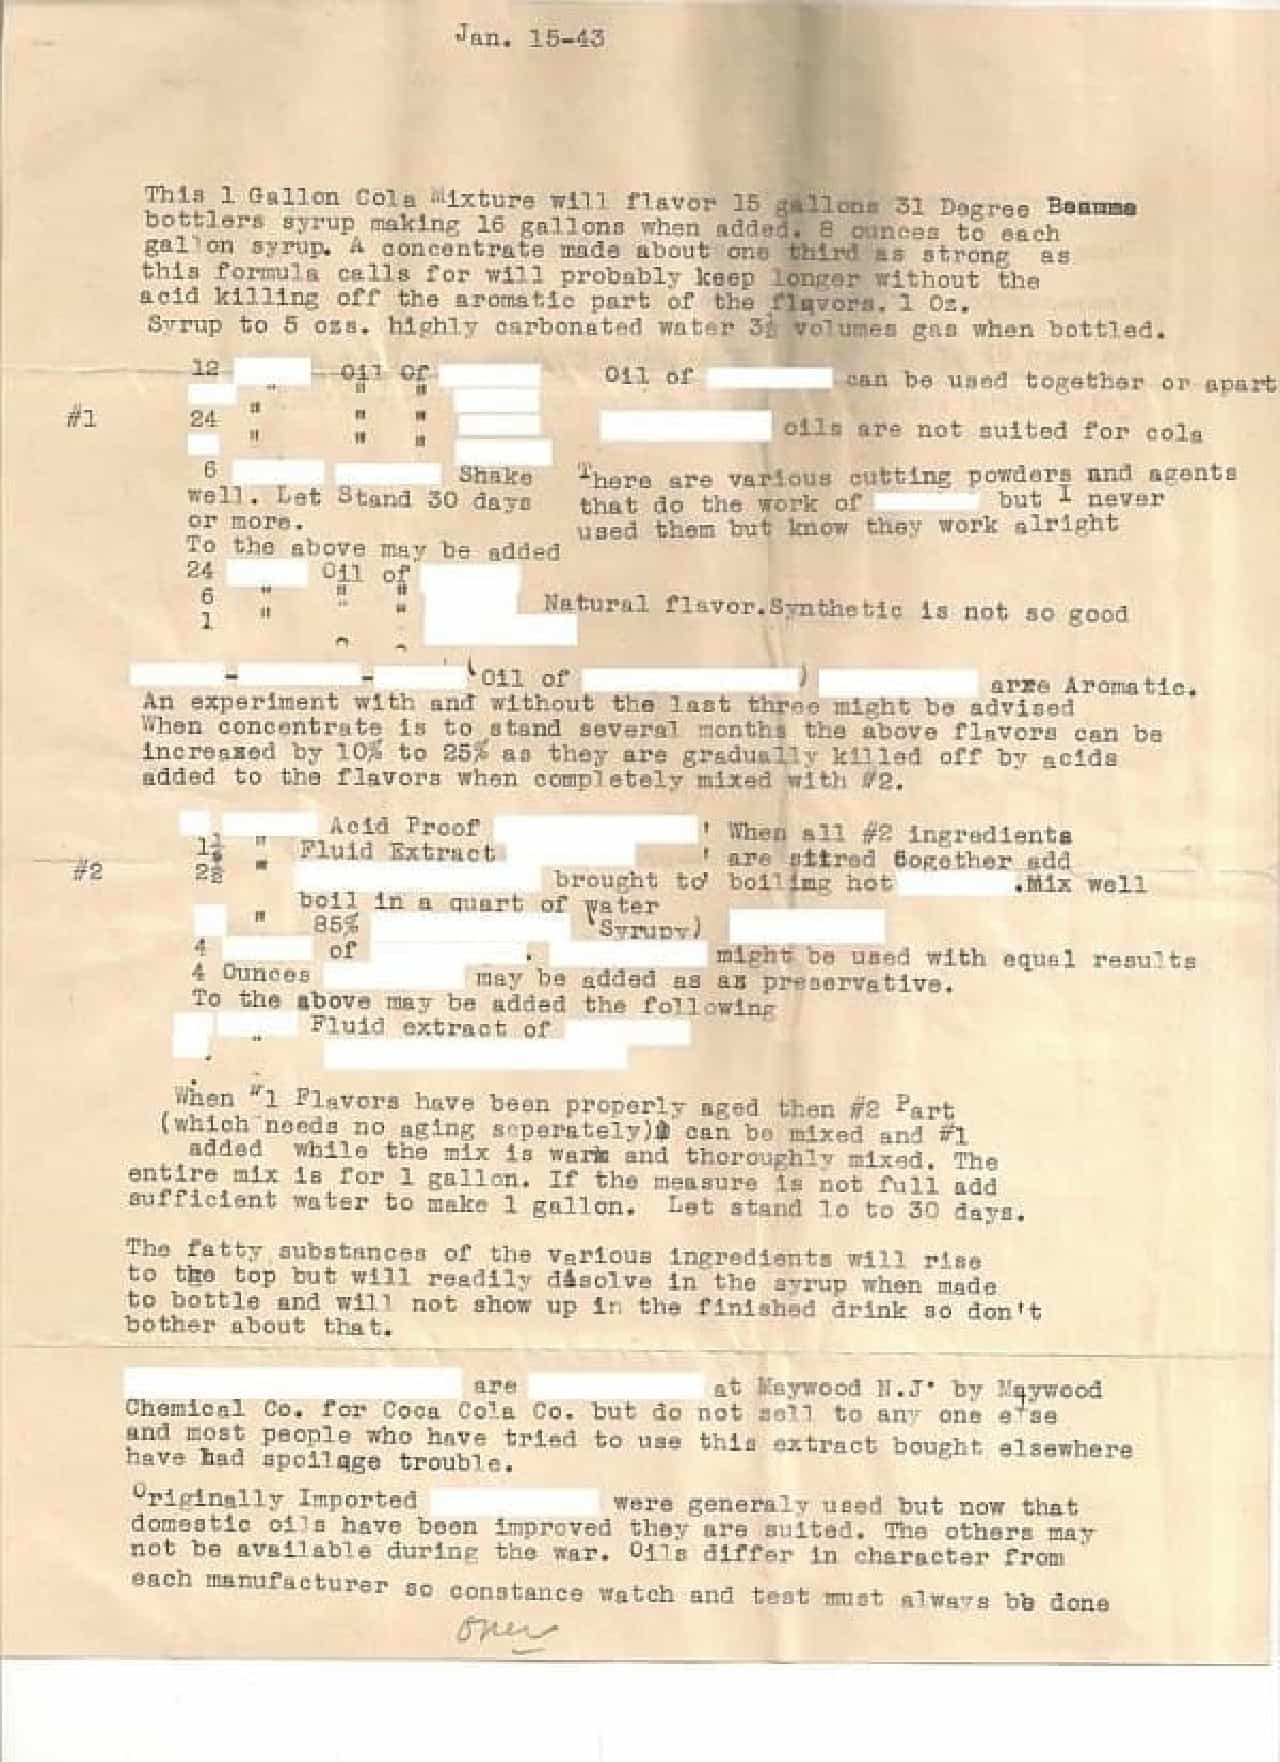 The first page of the document that is said to be a Coca-Cola recipe, the seventh line from the bottom has the description "Coca Cola Co."